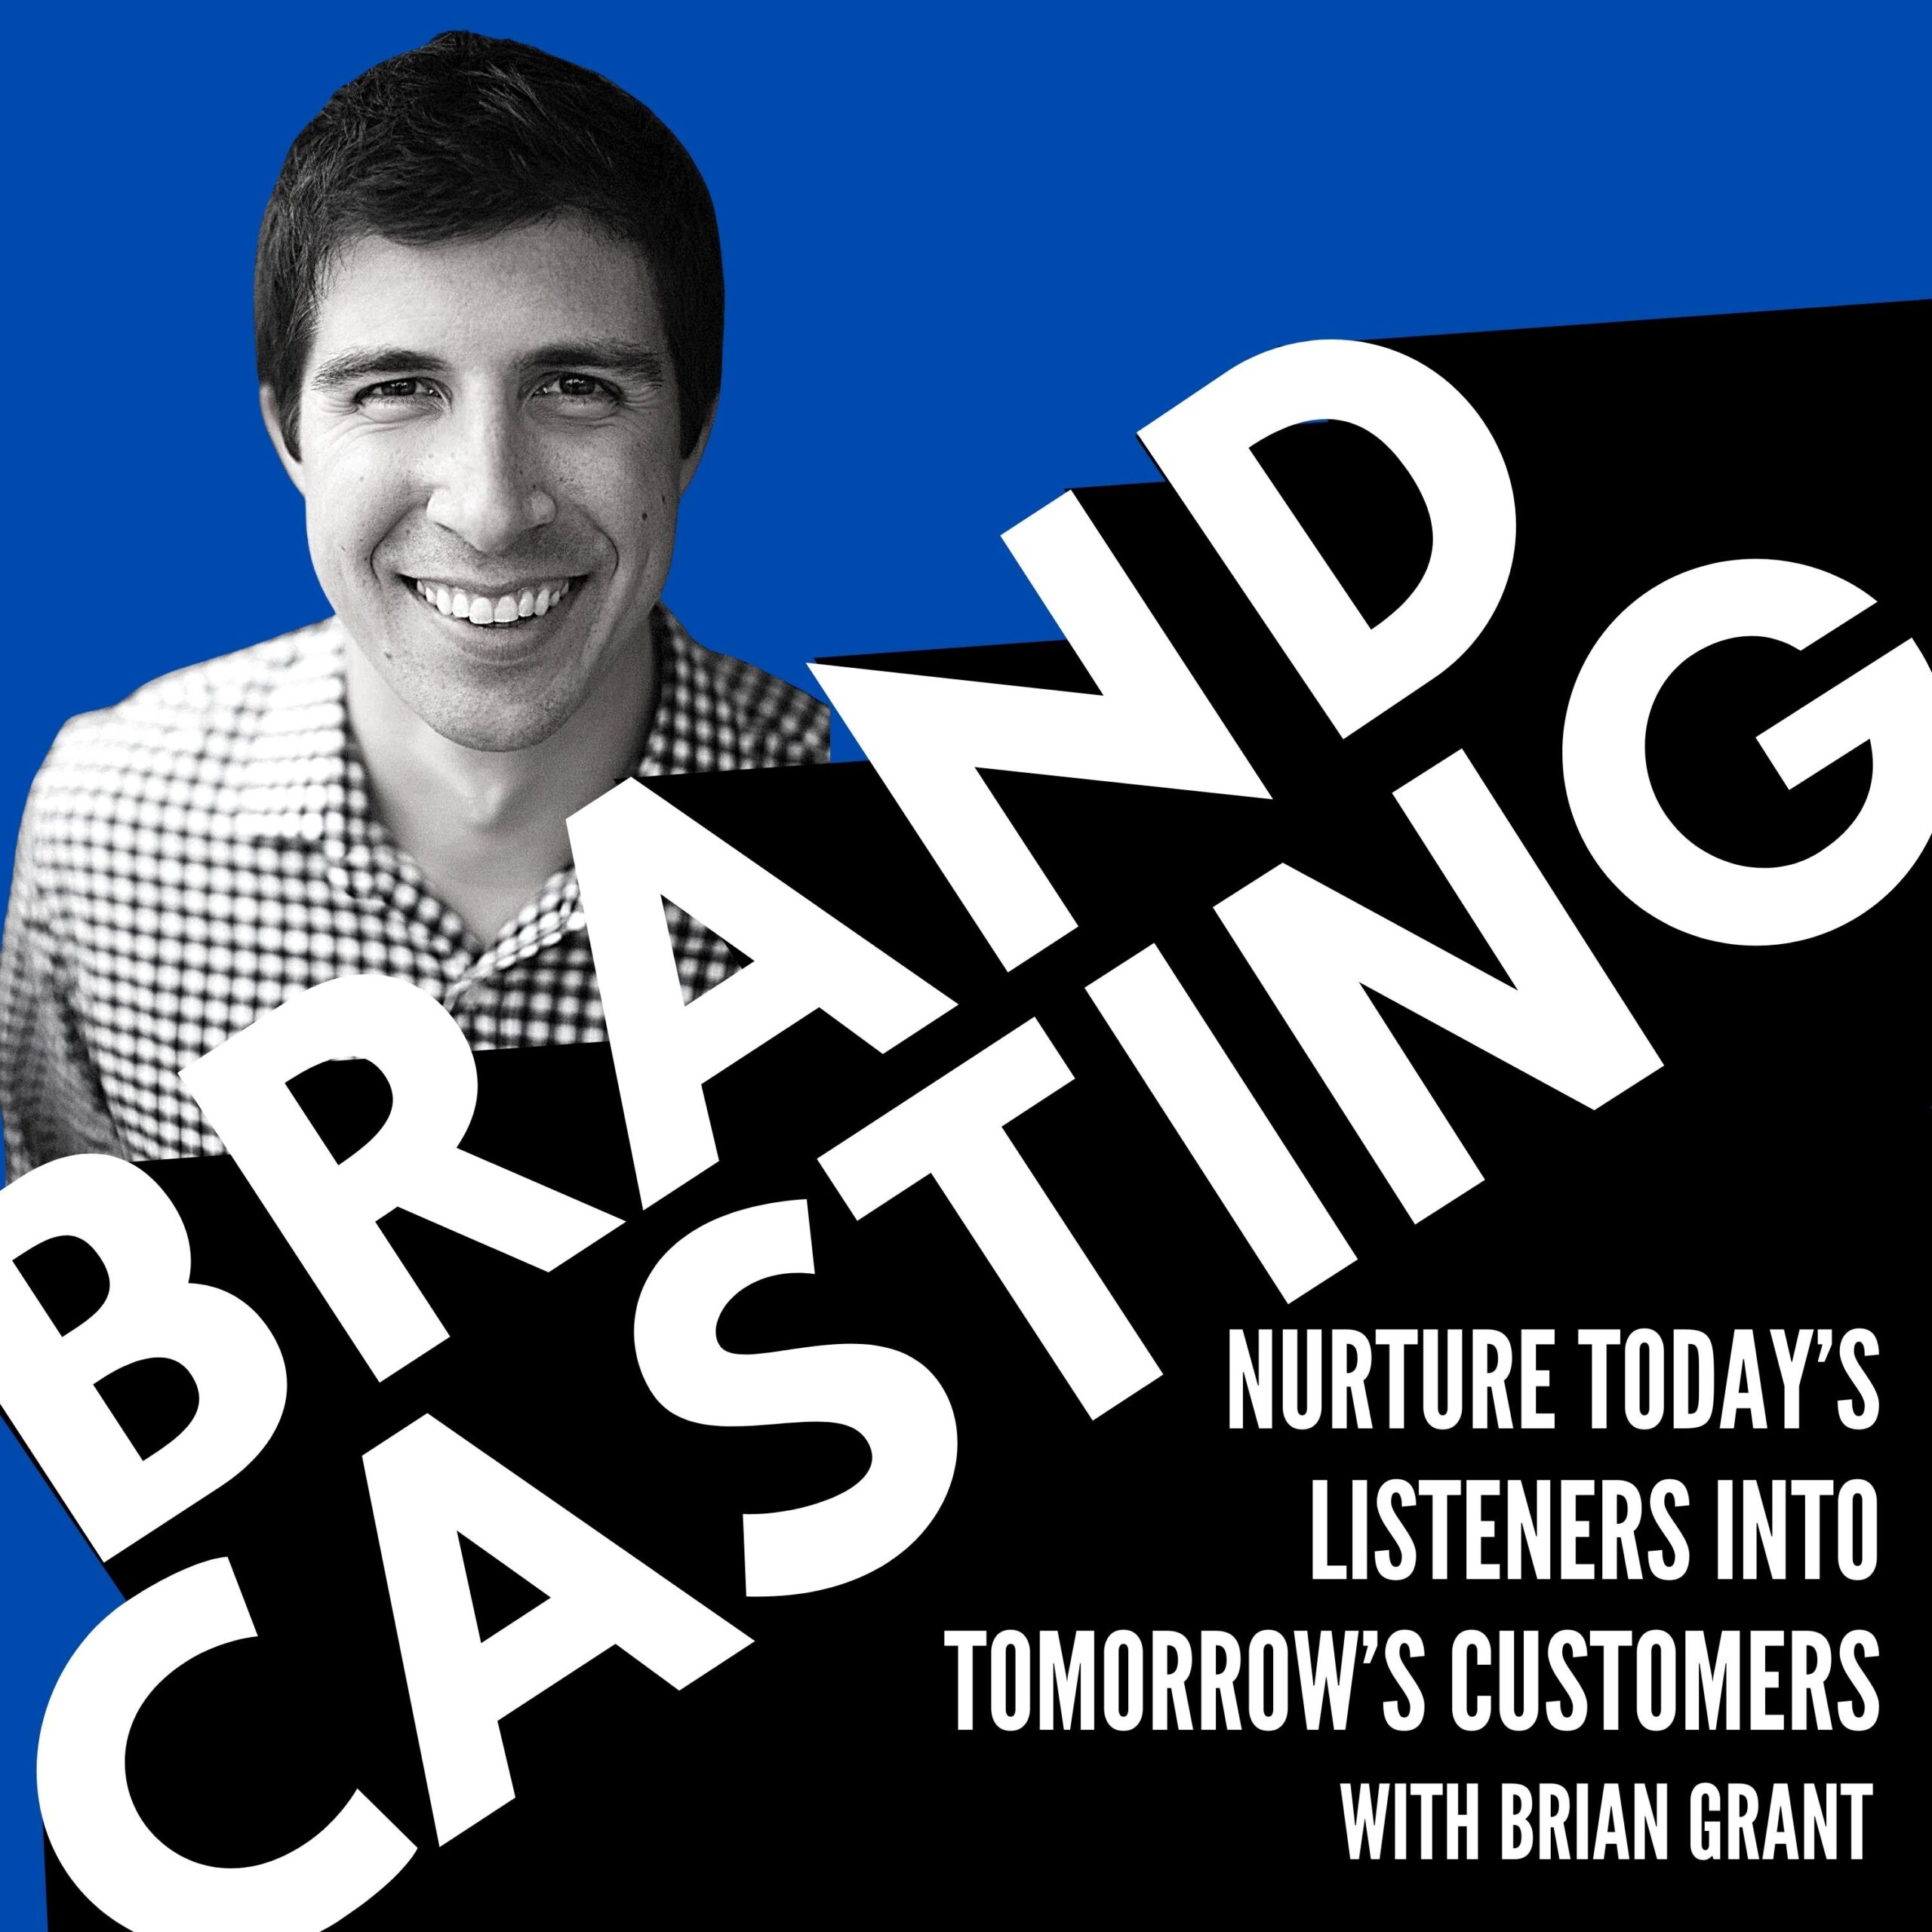 Brandcasting – Nurture Today's Listeners into Tomorrow’s Customers with Brian Grant